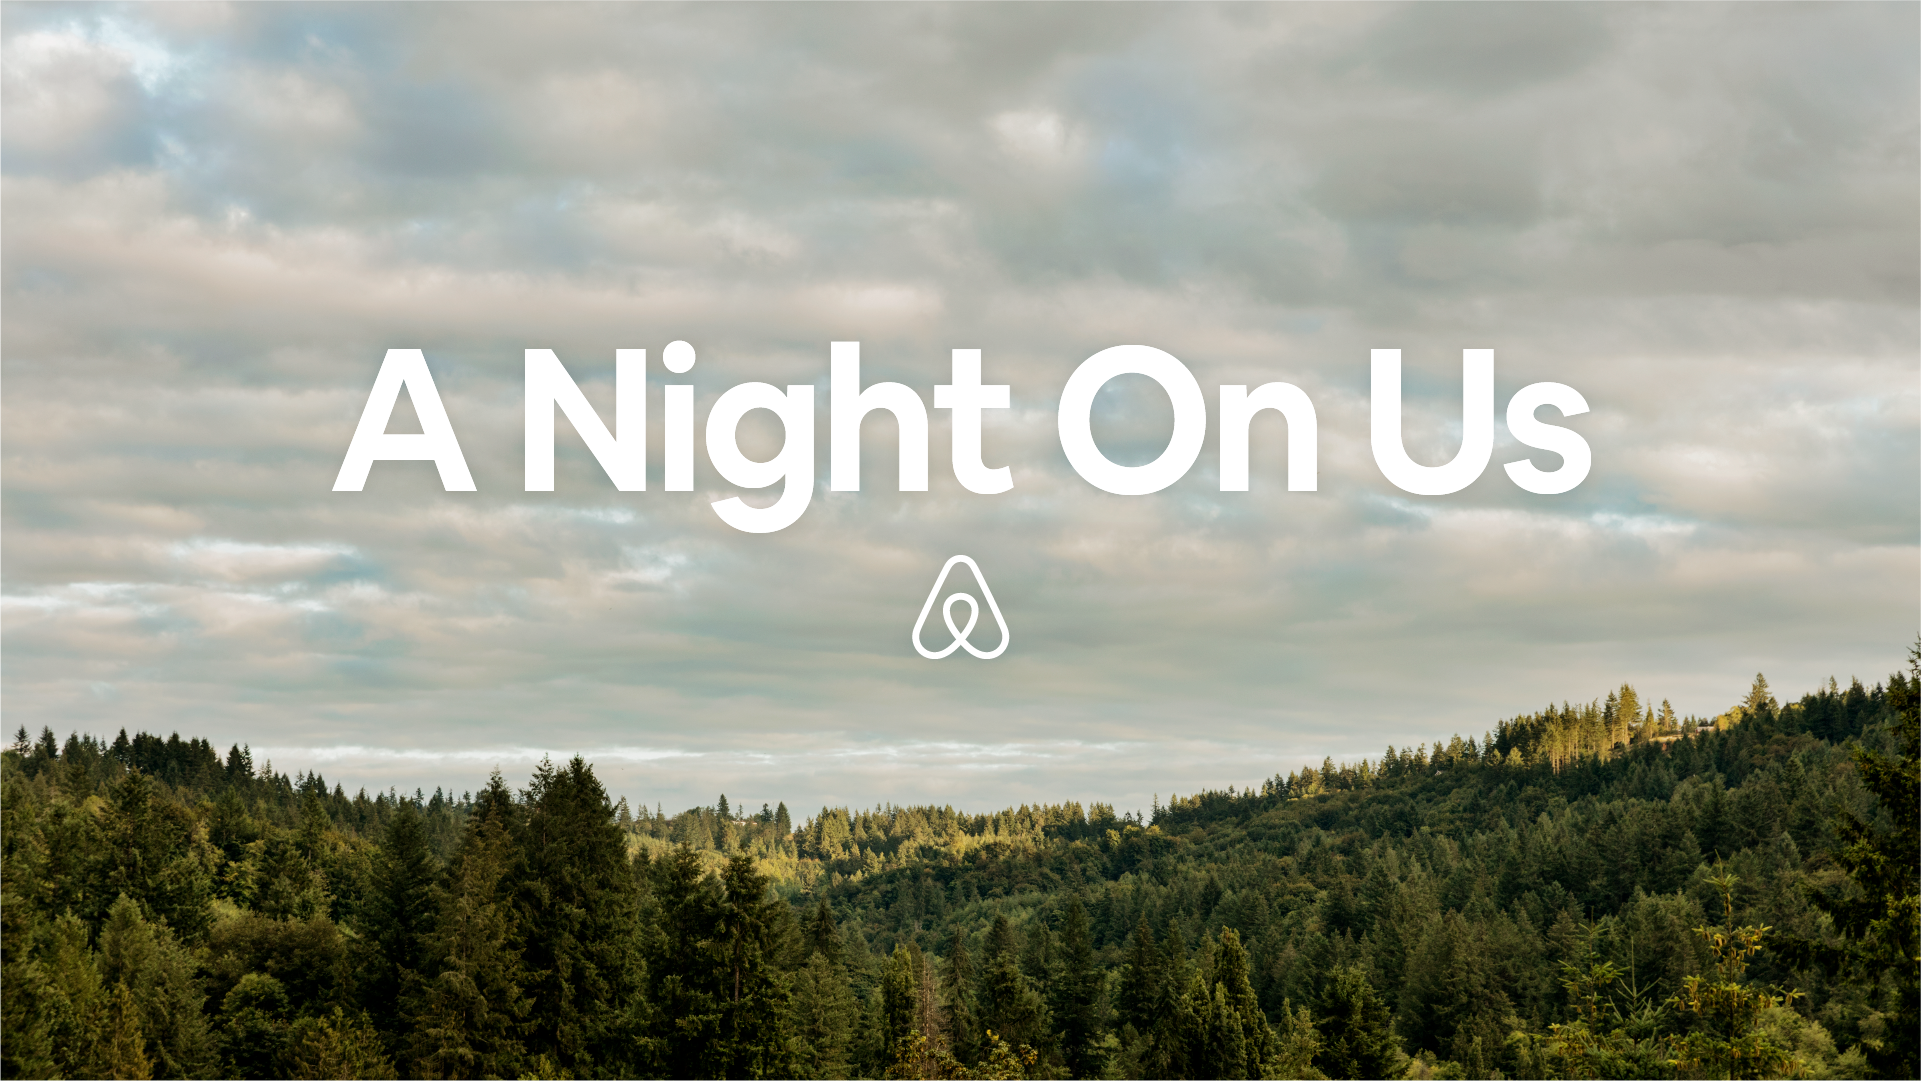 "A Night On Us" over a landscape image promoting our program for striking UAW members